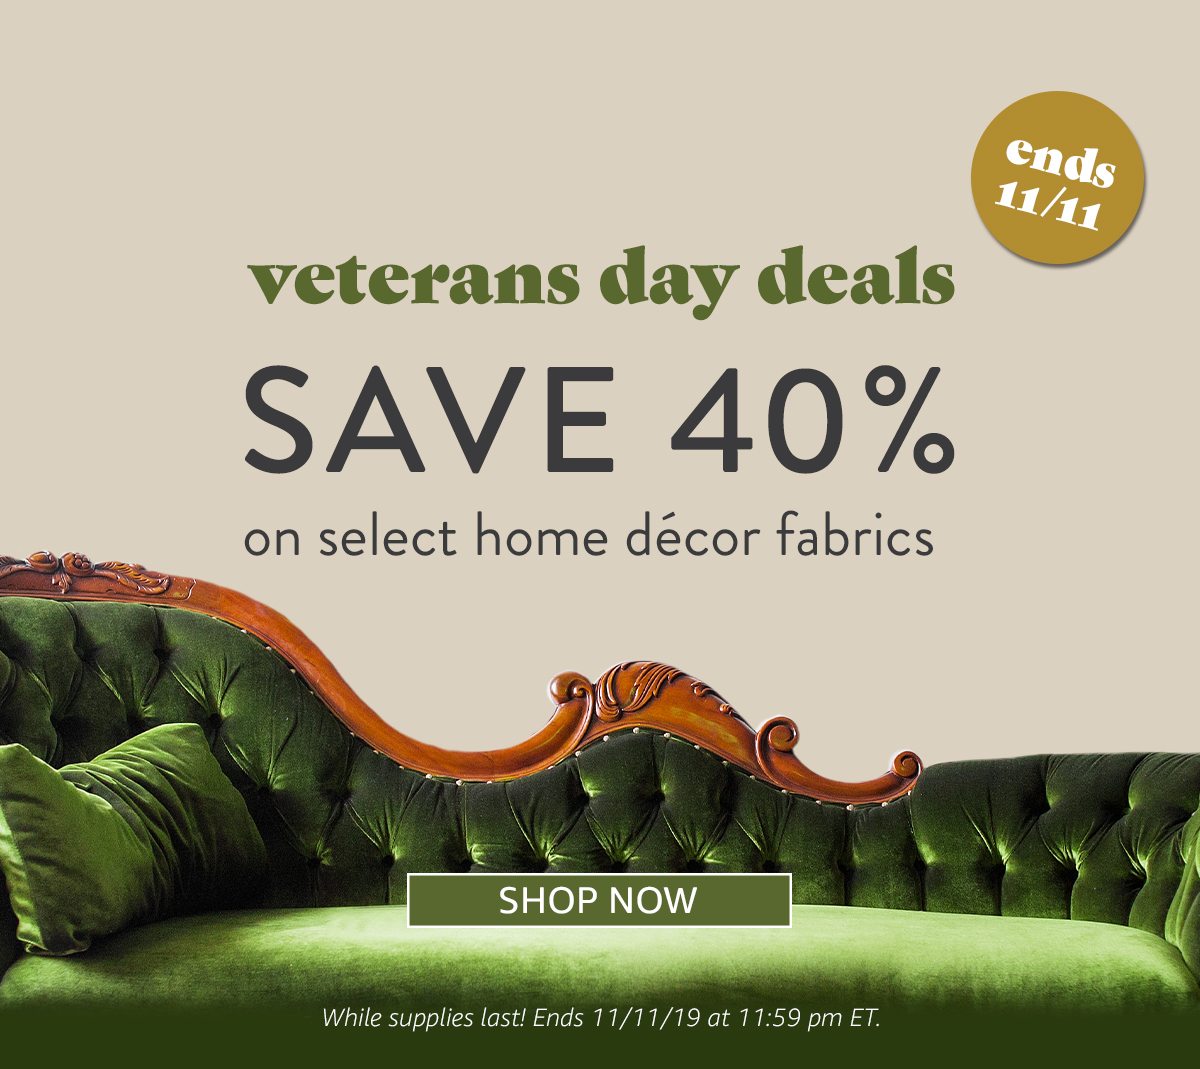 Veterans day deals - SAVE 65% on select exclusive Kaffe Fassett pre-cuts - Ends 11/11/19 at 11:59 pm ET.